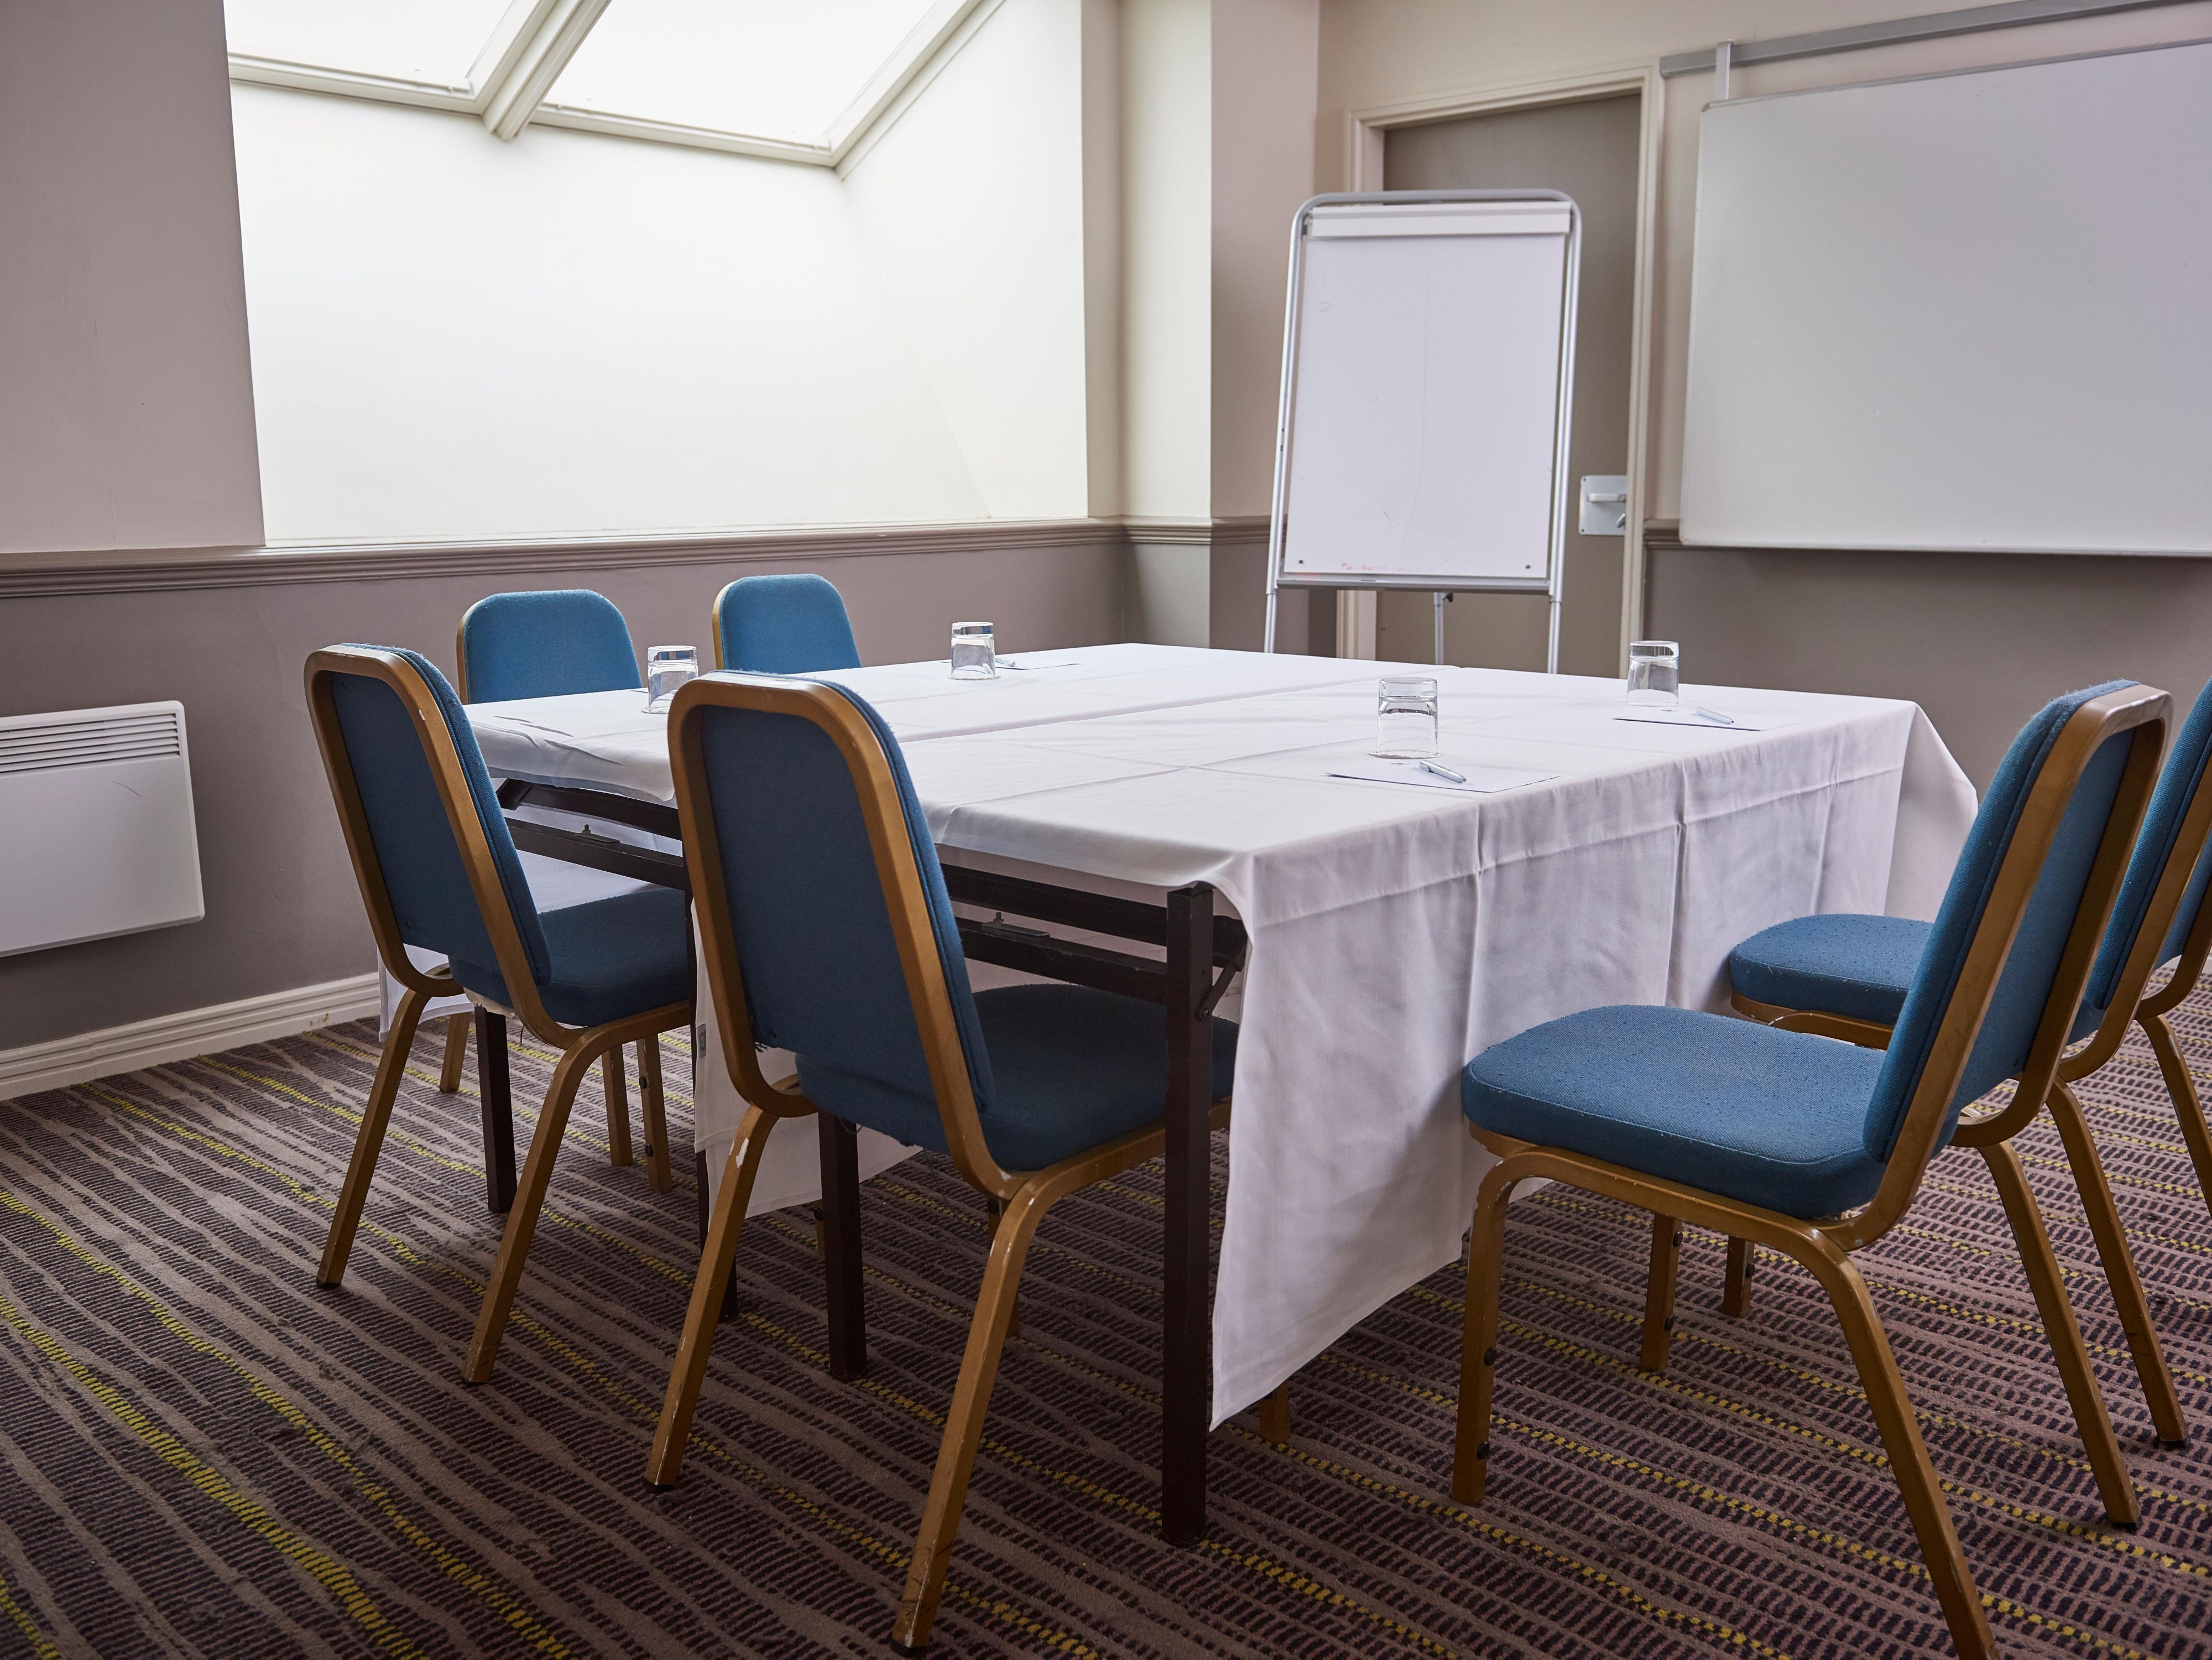 Our meeting rooms offer a vibrant space to host your next conference or meeting for up to 50 guests. Choose from our three meeting rooms, each featuring free Wi-Fi and natural daylight. To ensure everything is taken care of during your business meeting we offer delegate packages to provide delicious catering options for all your guests.